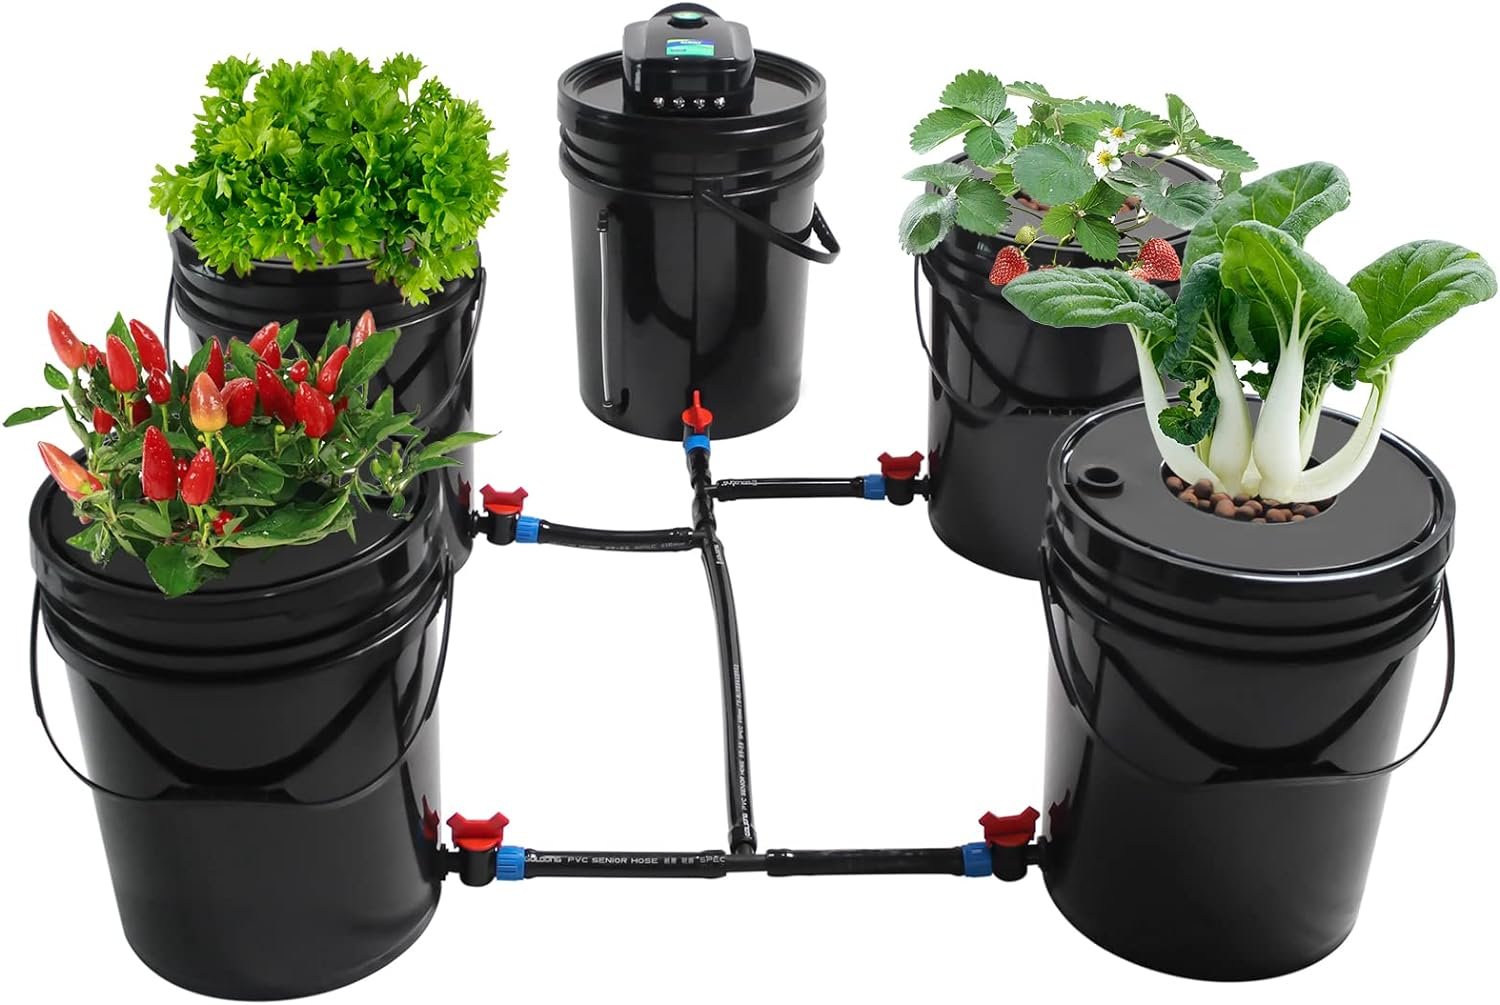 DNYSYSJ DWC Hydroponic System, 5 Gallon 5 Buckets, Deep Culture Growing Kit with Pump with Water Exchange Bucket, Air Stone and Water Level Device, for Indoor/Outdoor Leafy Vegetables